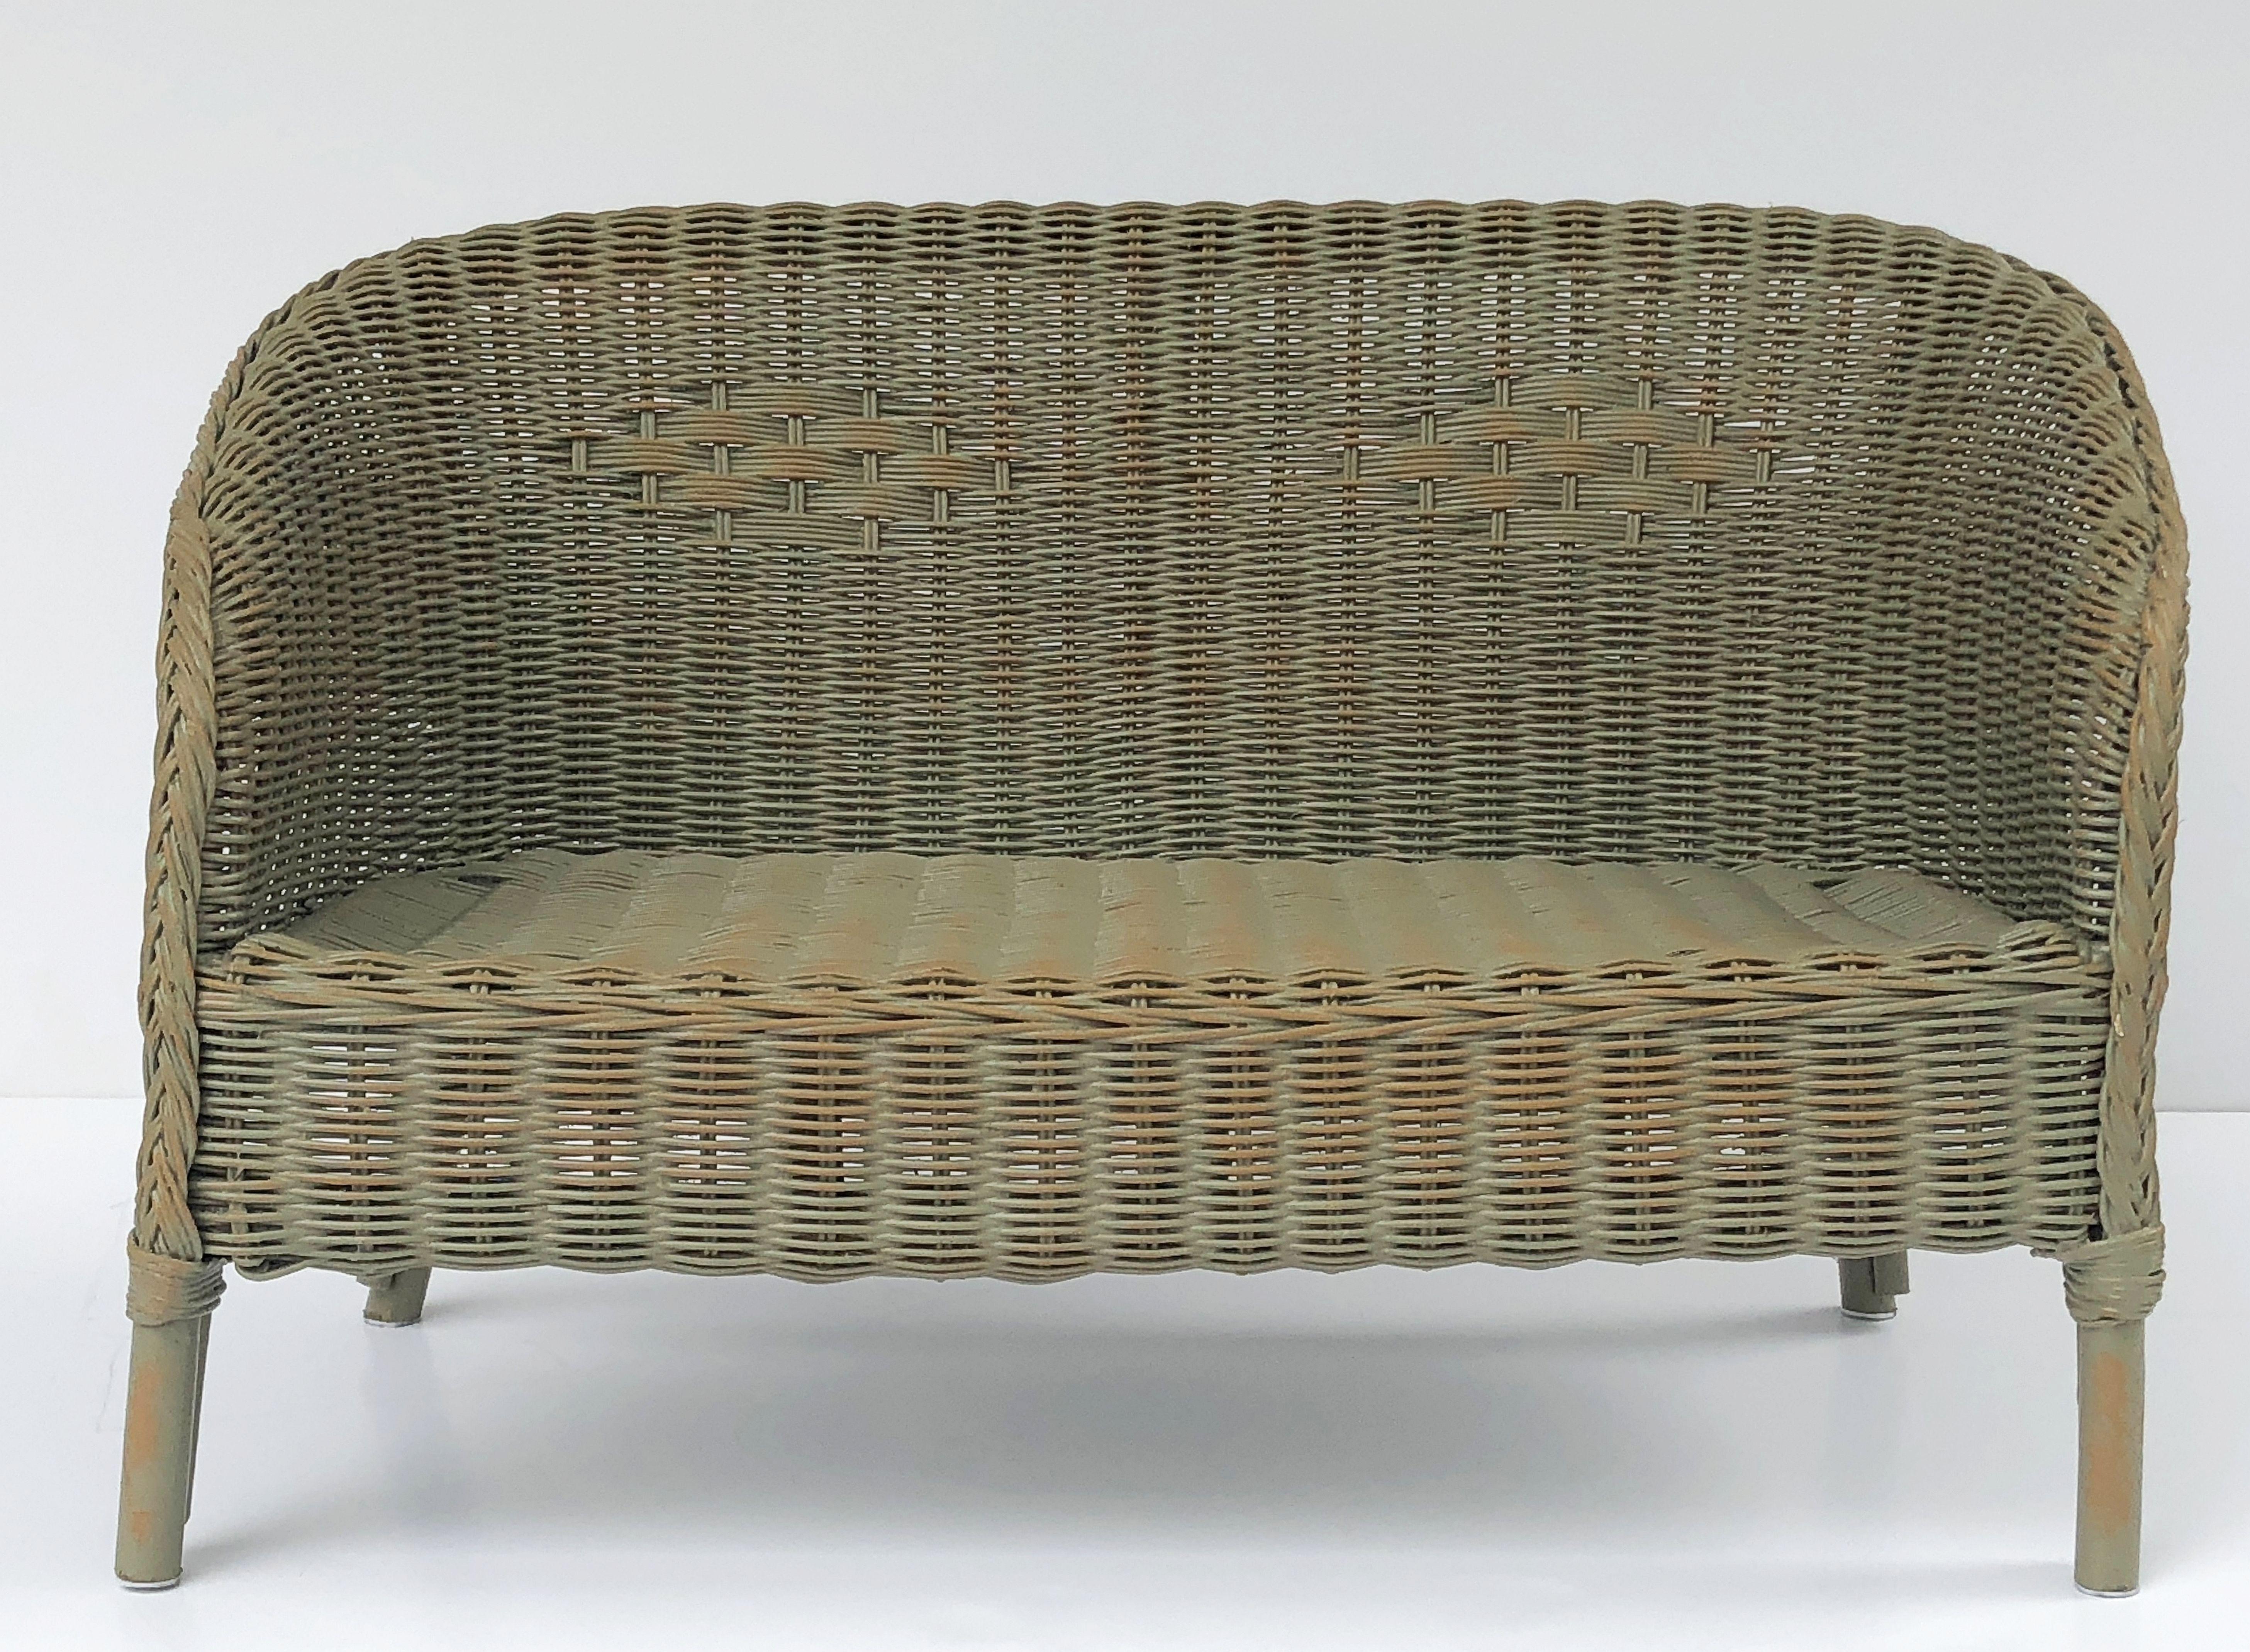 A fine Lloyd Loom child's settee or seating bench sofa, synonymous with classic English style, featuring a settee of woven wicker and wire over a wood frame stretcher.

Perfect for an indoor or outdoor garden, garden room, or conservatory, this